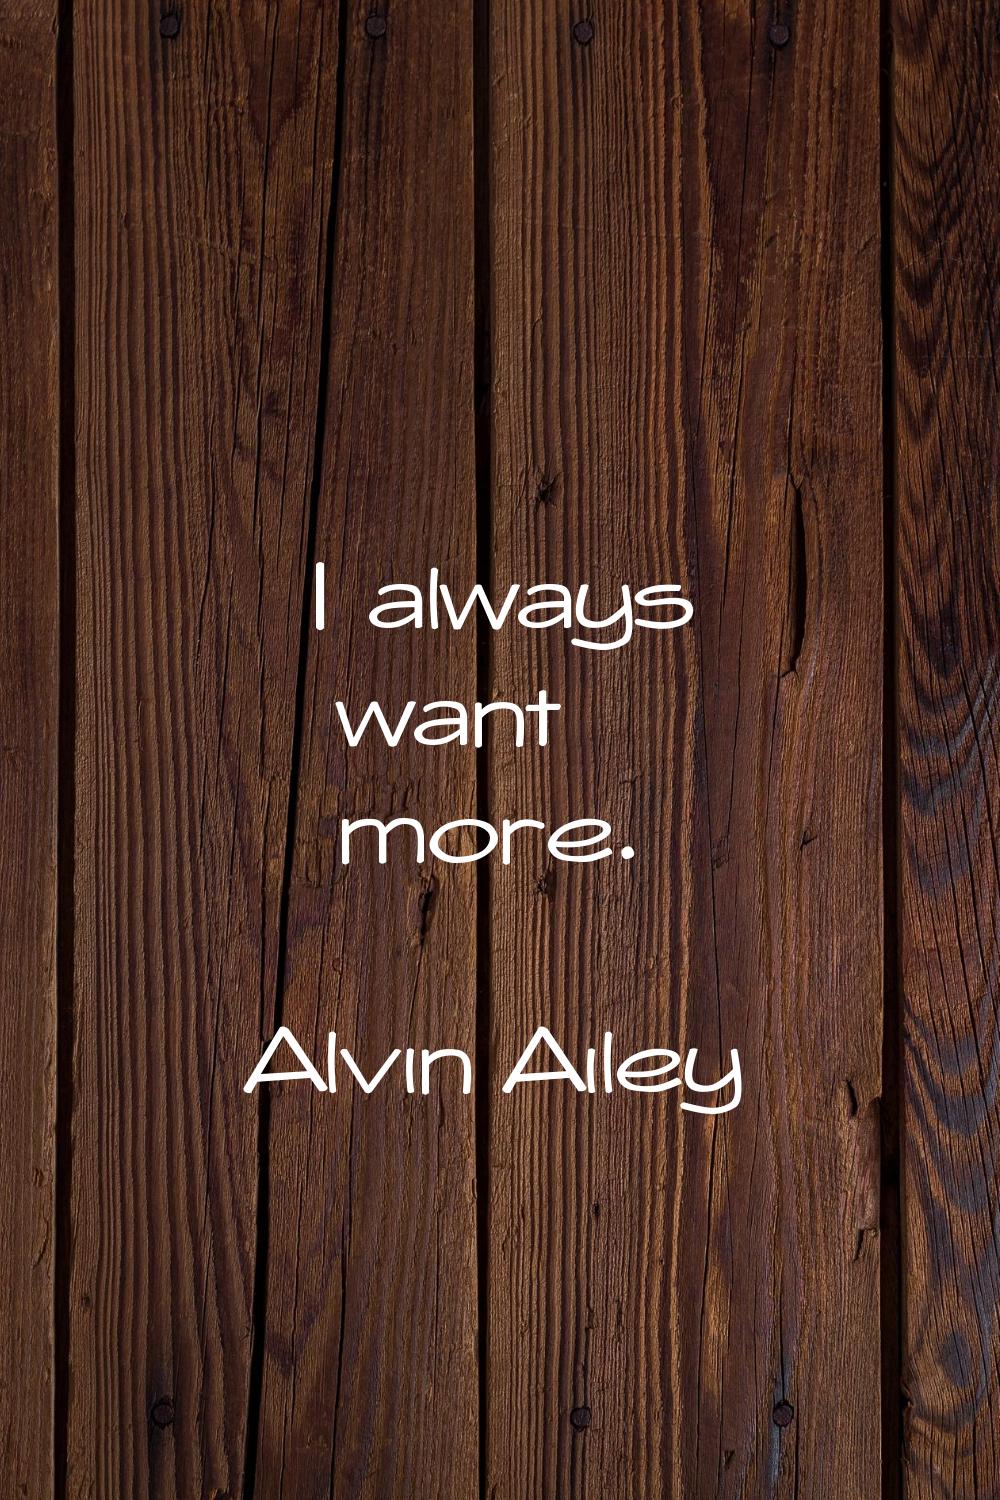 I always want more.